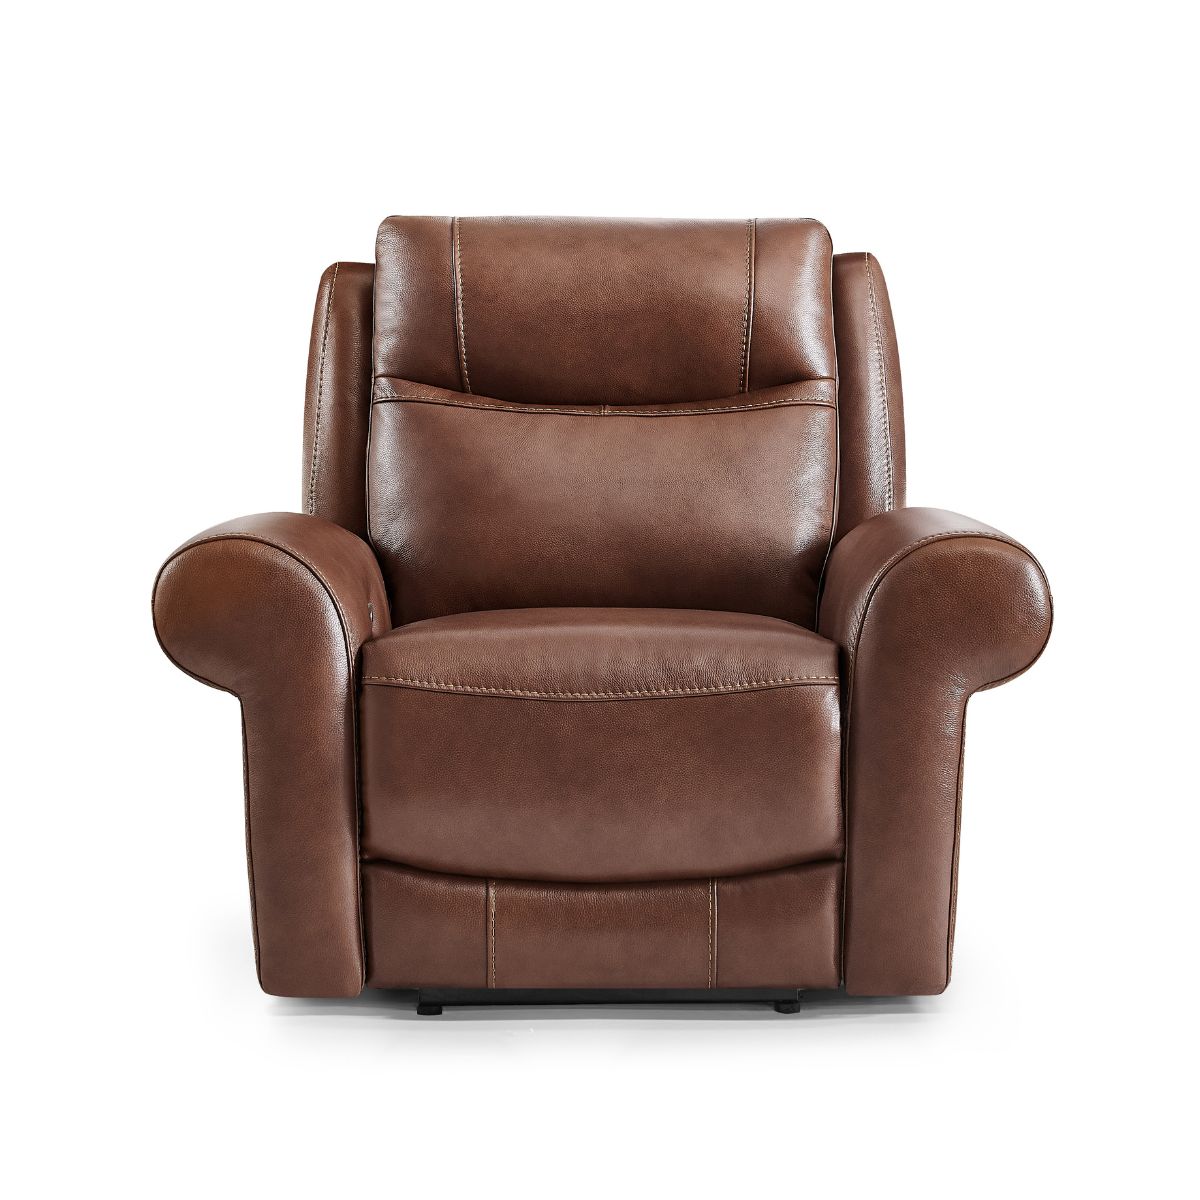 Lindfield Tan Leather Powered Recliner - 1